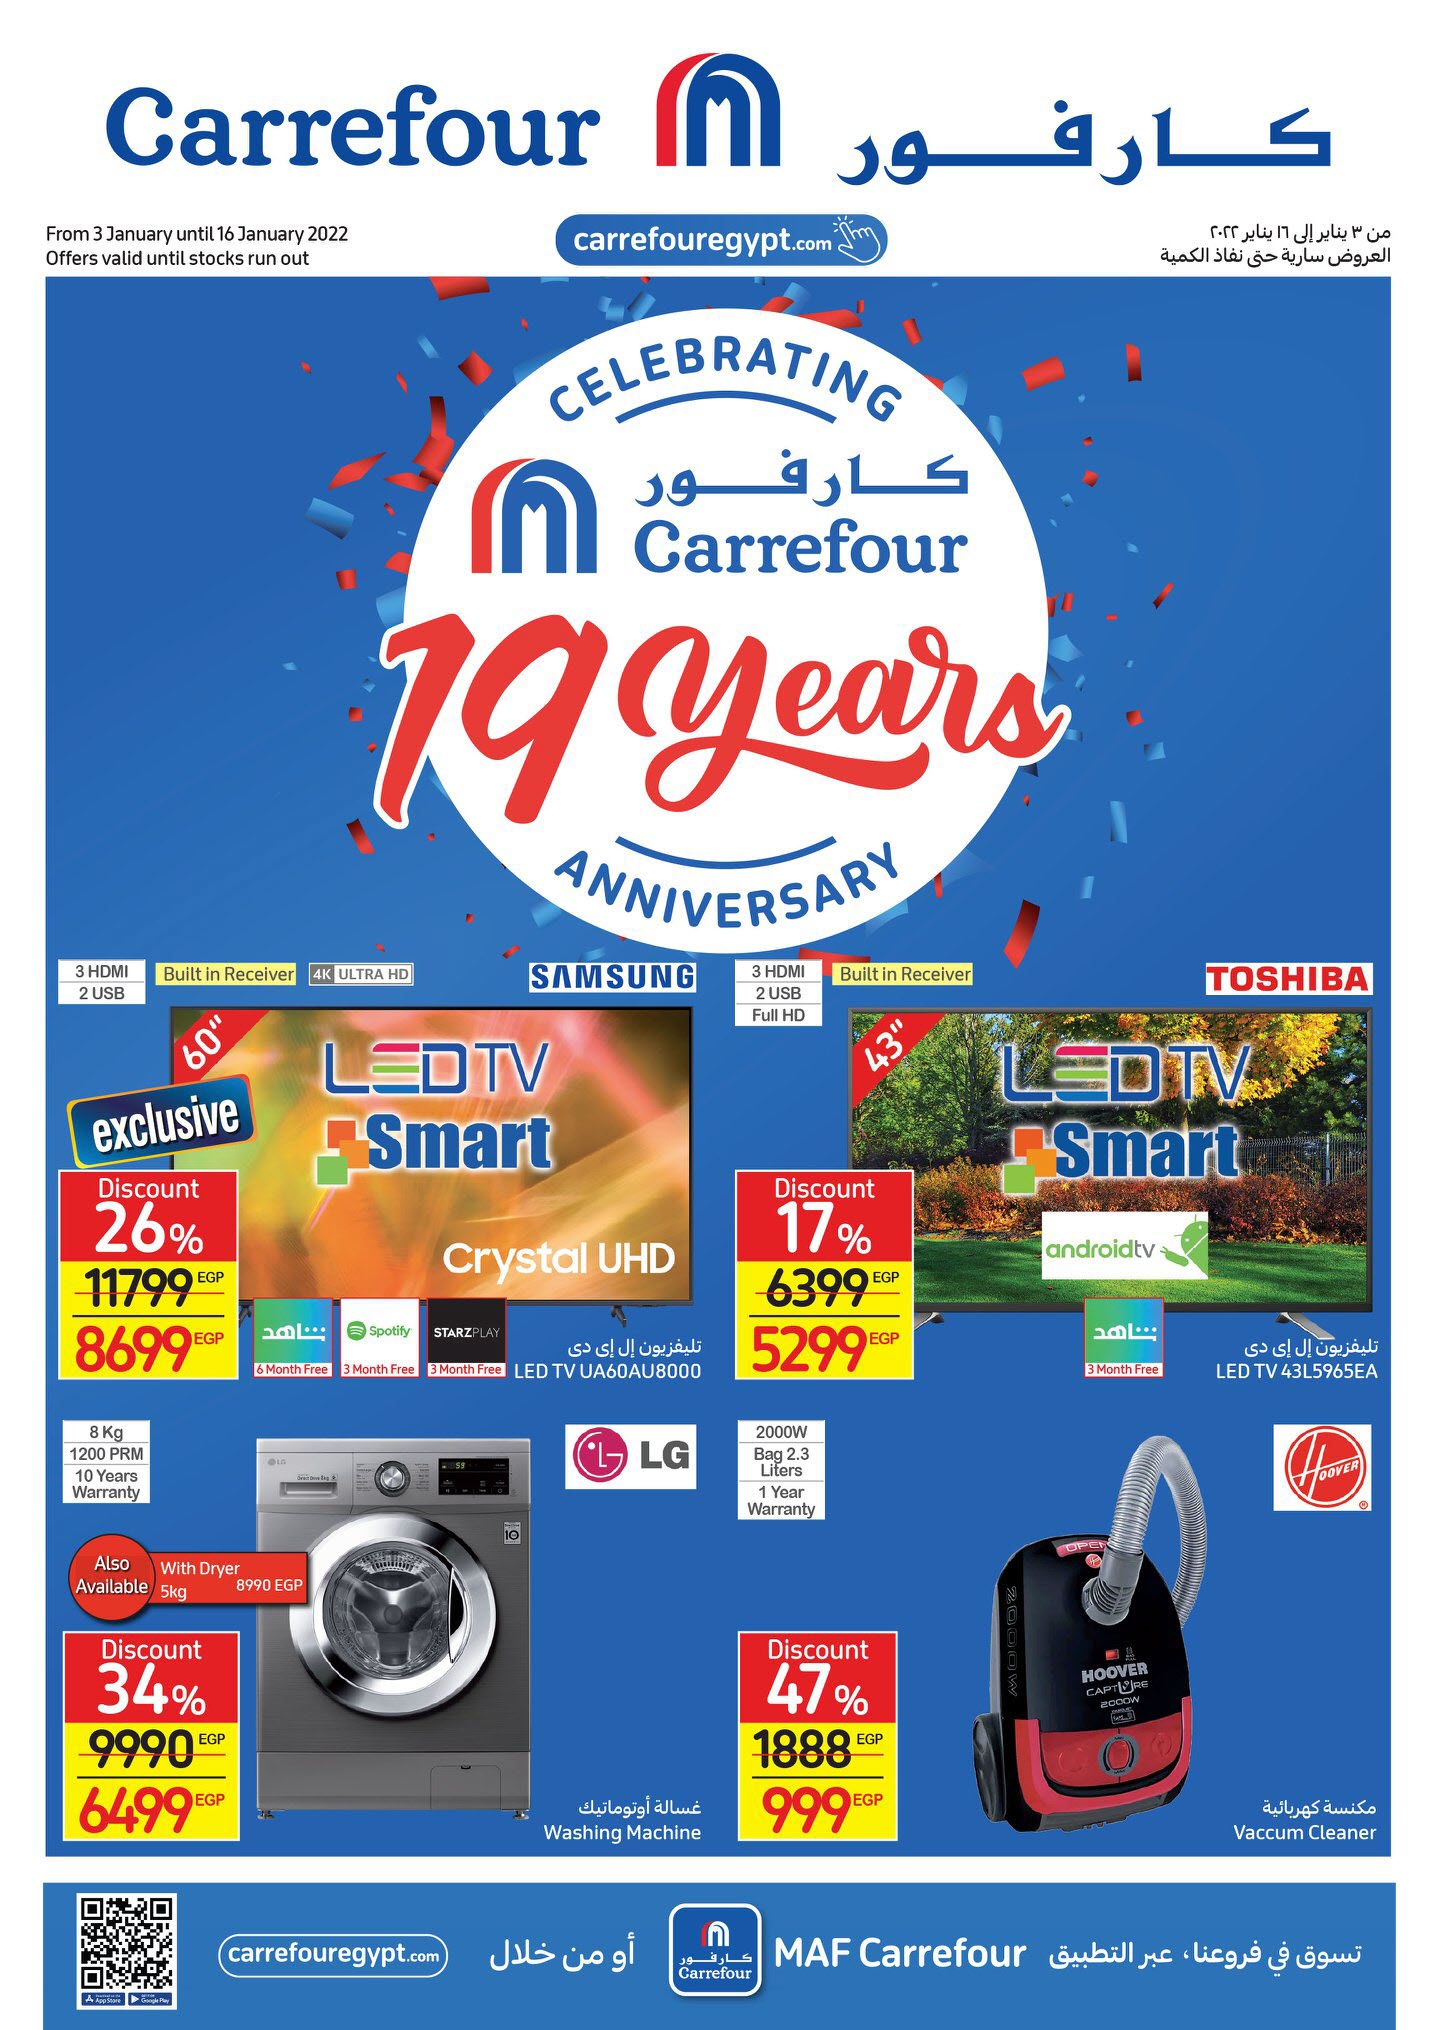 Carrefour magazine offers complete with 50% discounts and a surprise purchase in convenient installments without interest 2